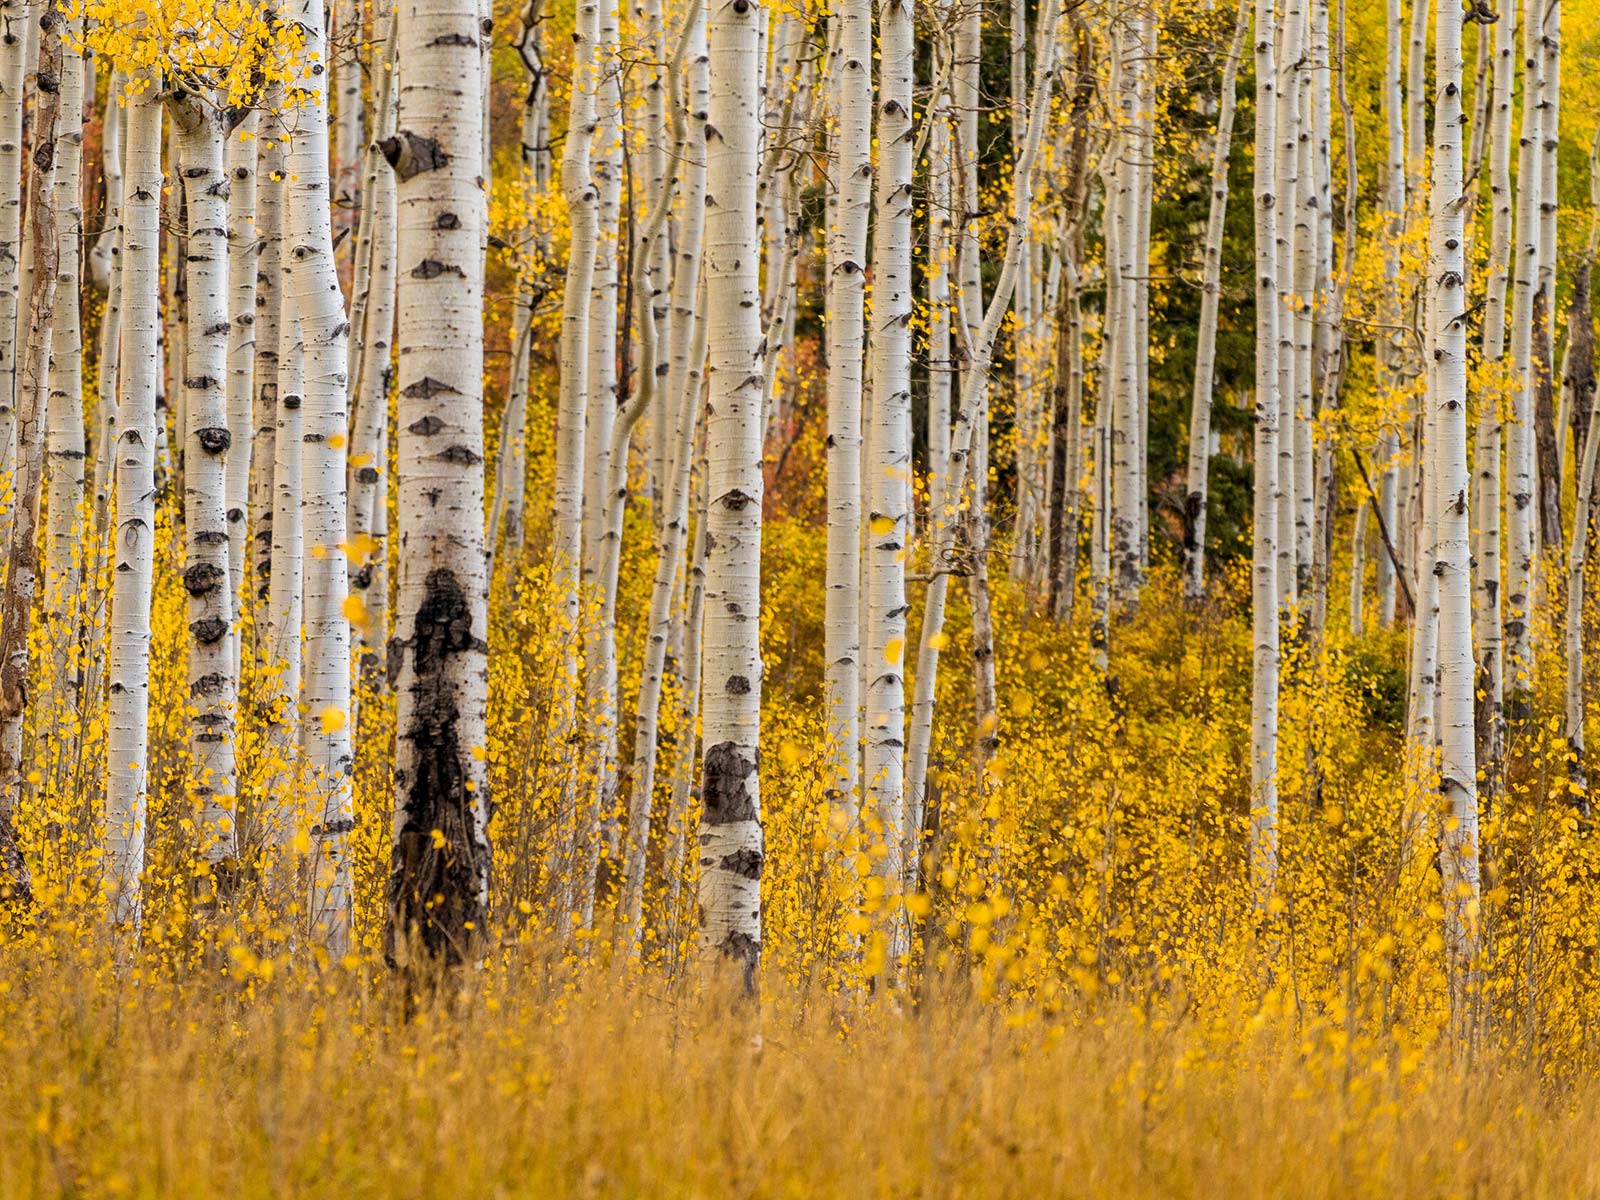 Yellow aspens in the forest during the fall